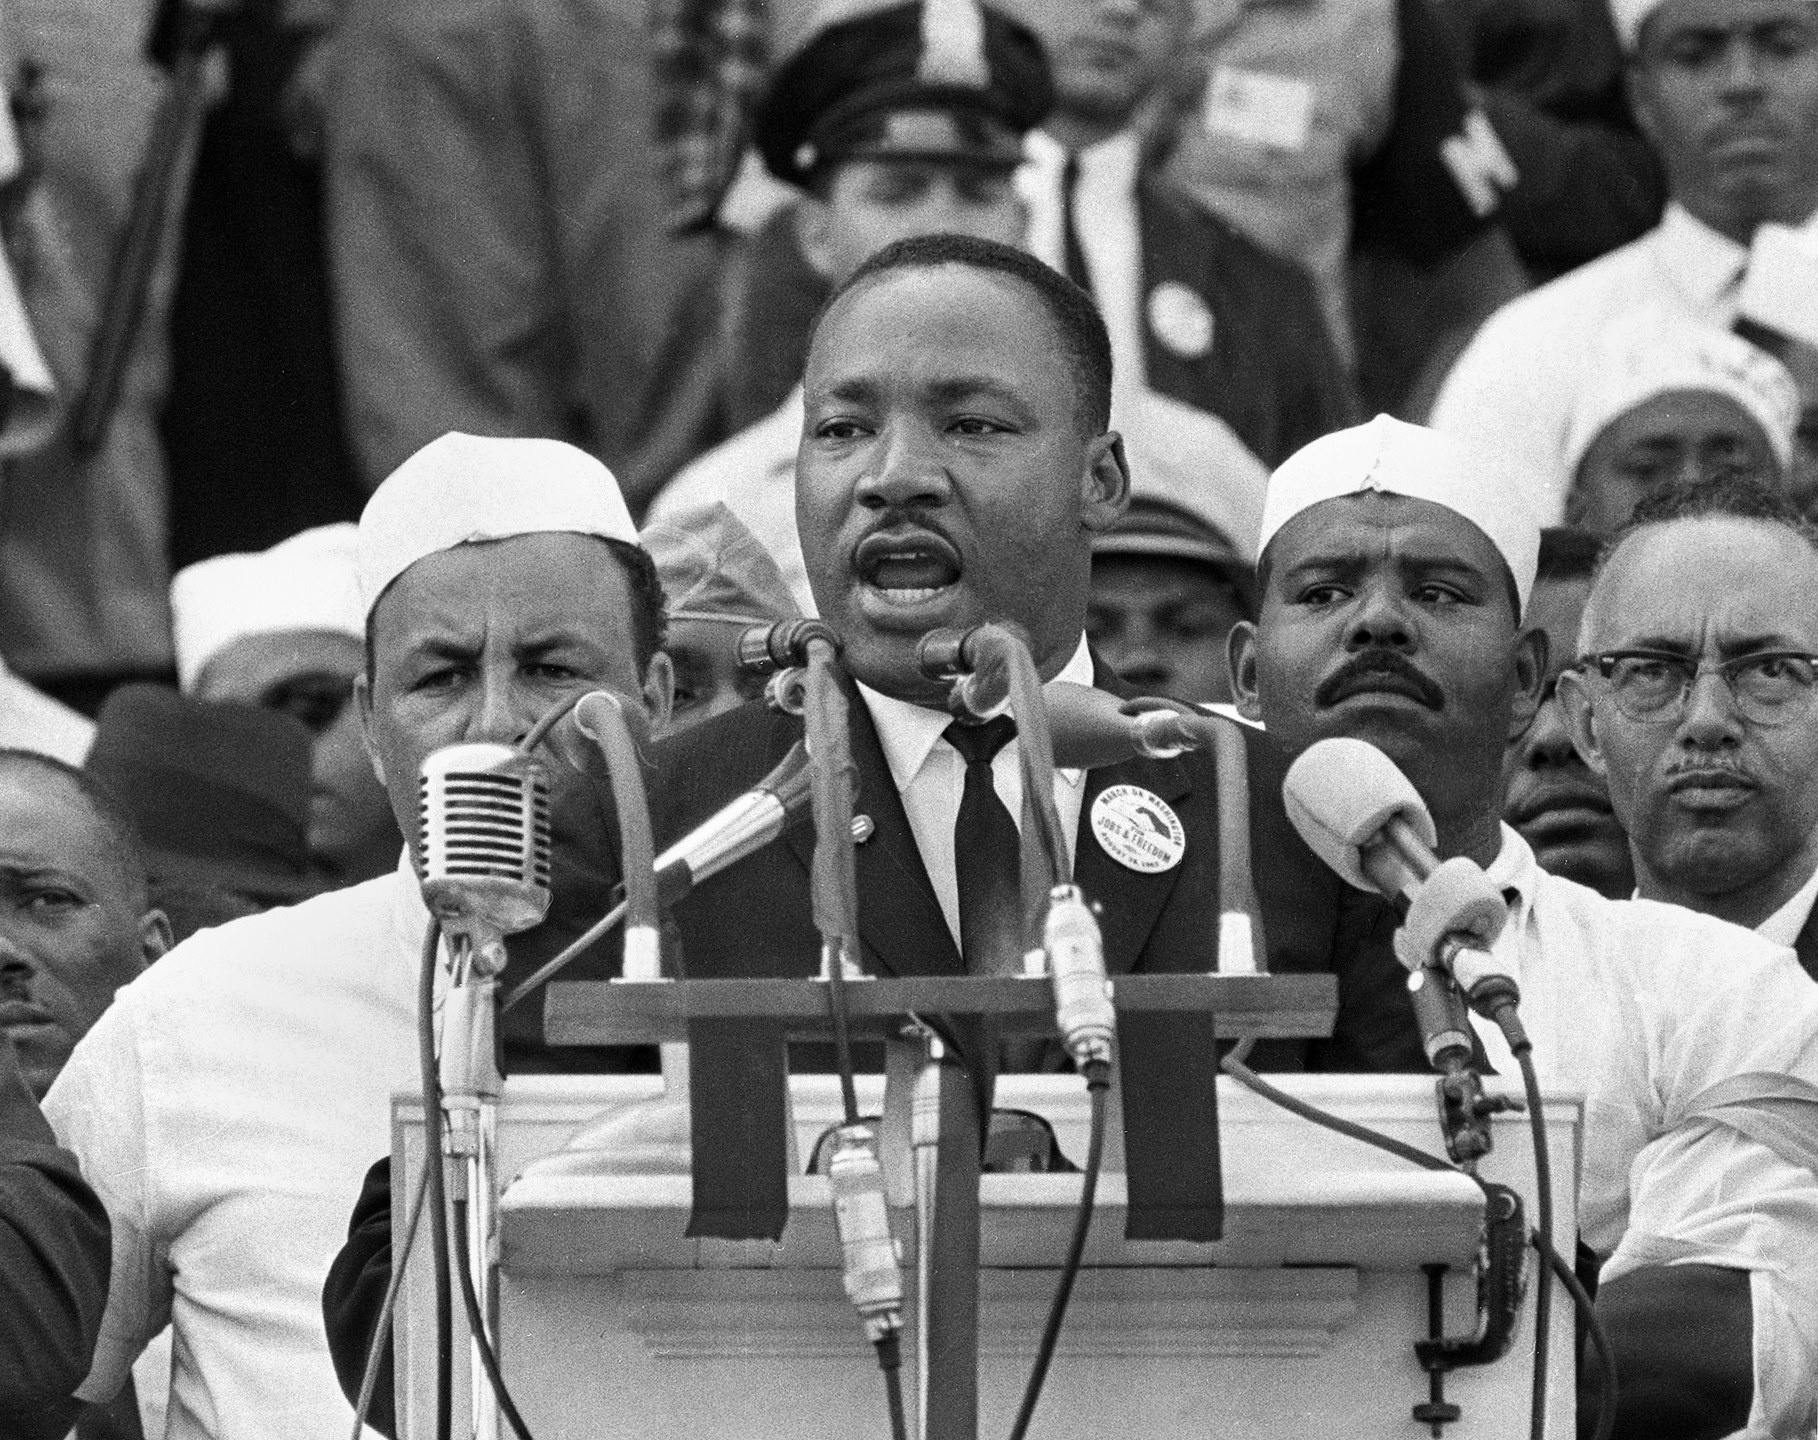 Dr. King giving his "I Have a Dream" speech